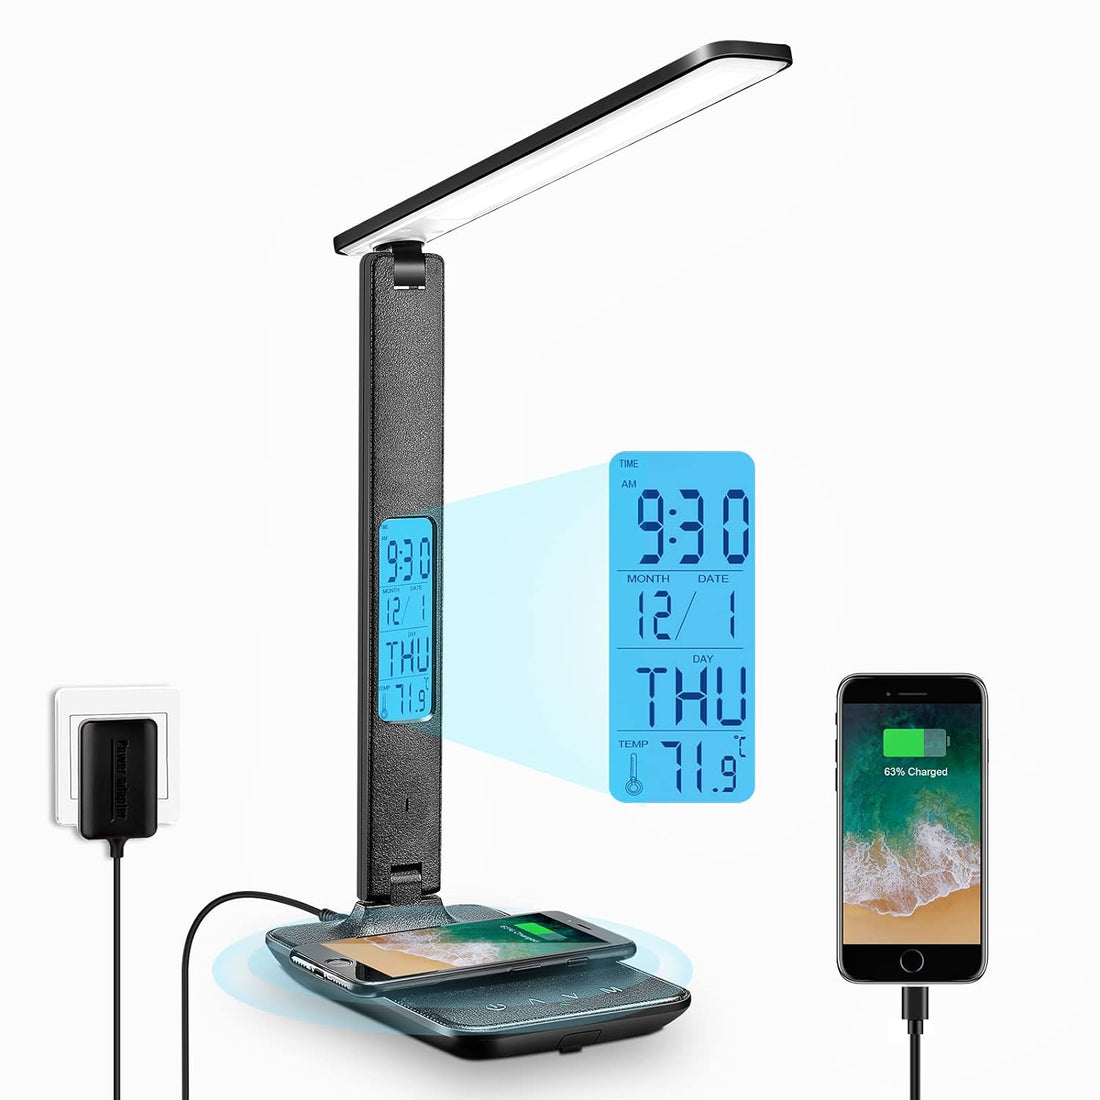 LAOPAO LED Desk Lamp with Wireless Charger, USB Charging Port, Adjustable & Foldable with Clock, Alarm, Date, Temperature, 5-Level Dimmable Lighting, for Office with Adapter